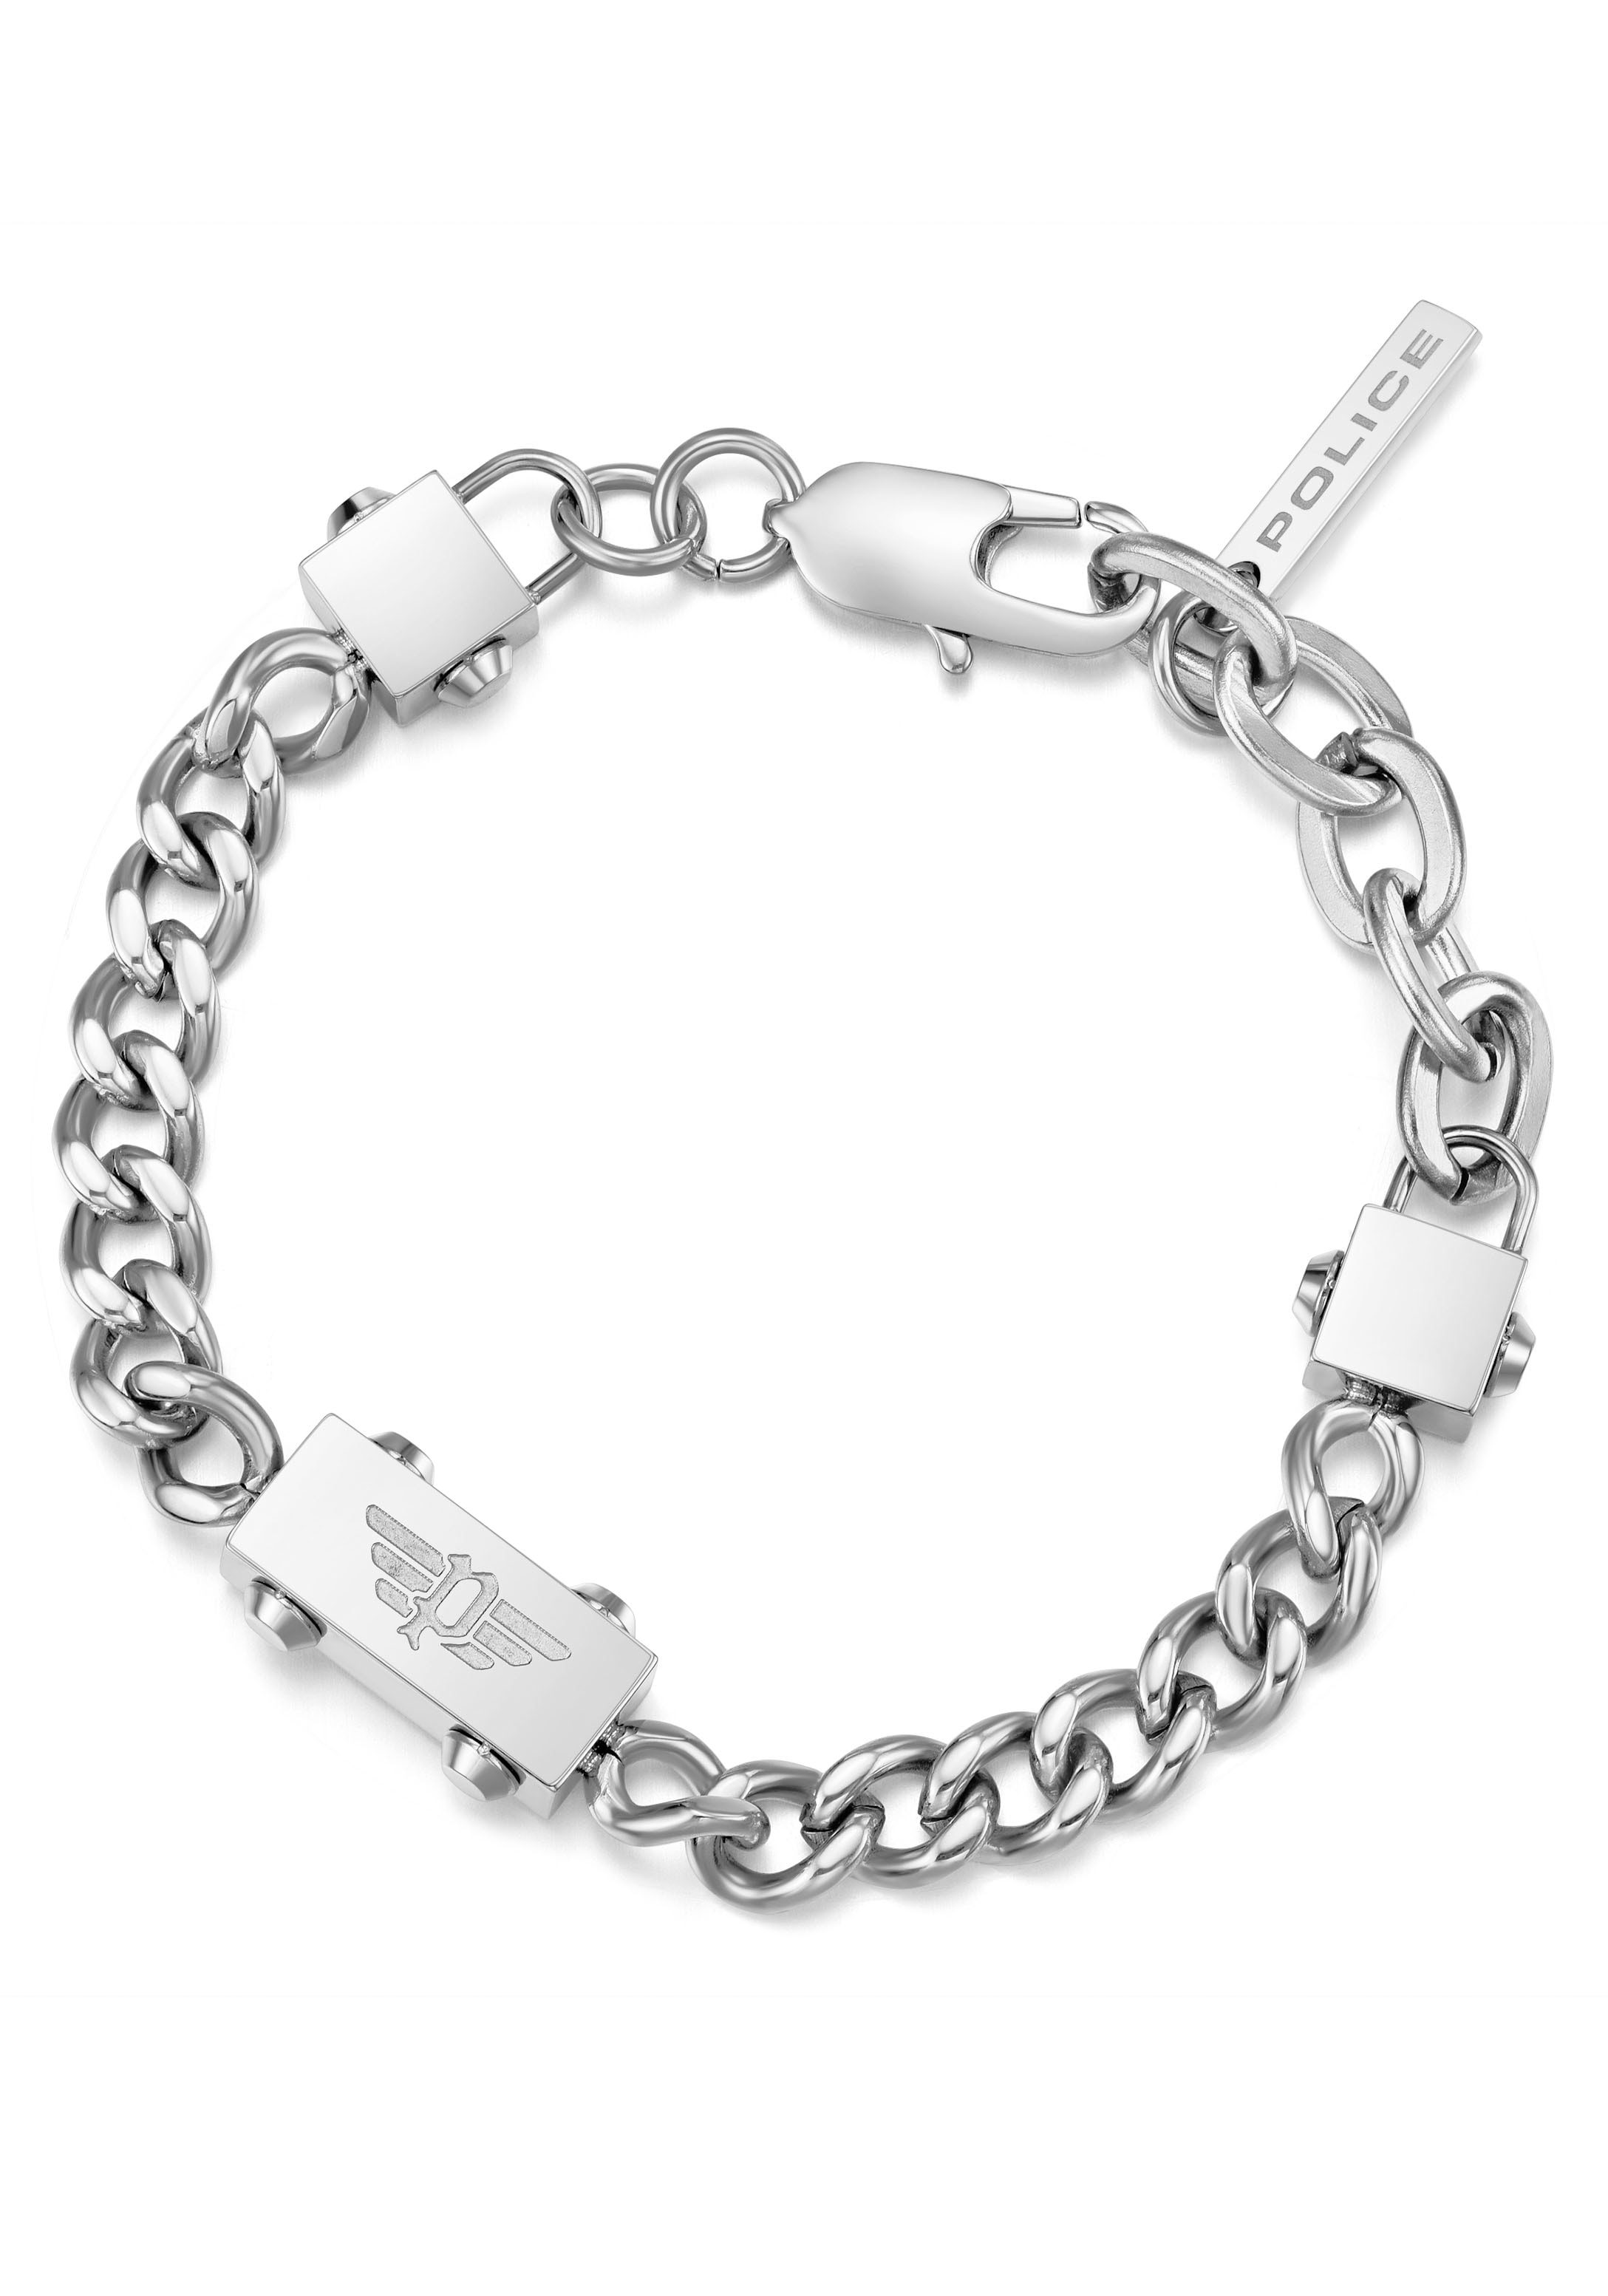 Mode Acheter PEAGB0002106« en Police »CHAINED, maintenant PEAGB0002102, ligne Armband